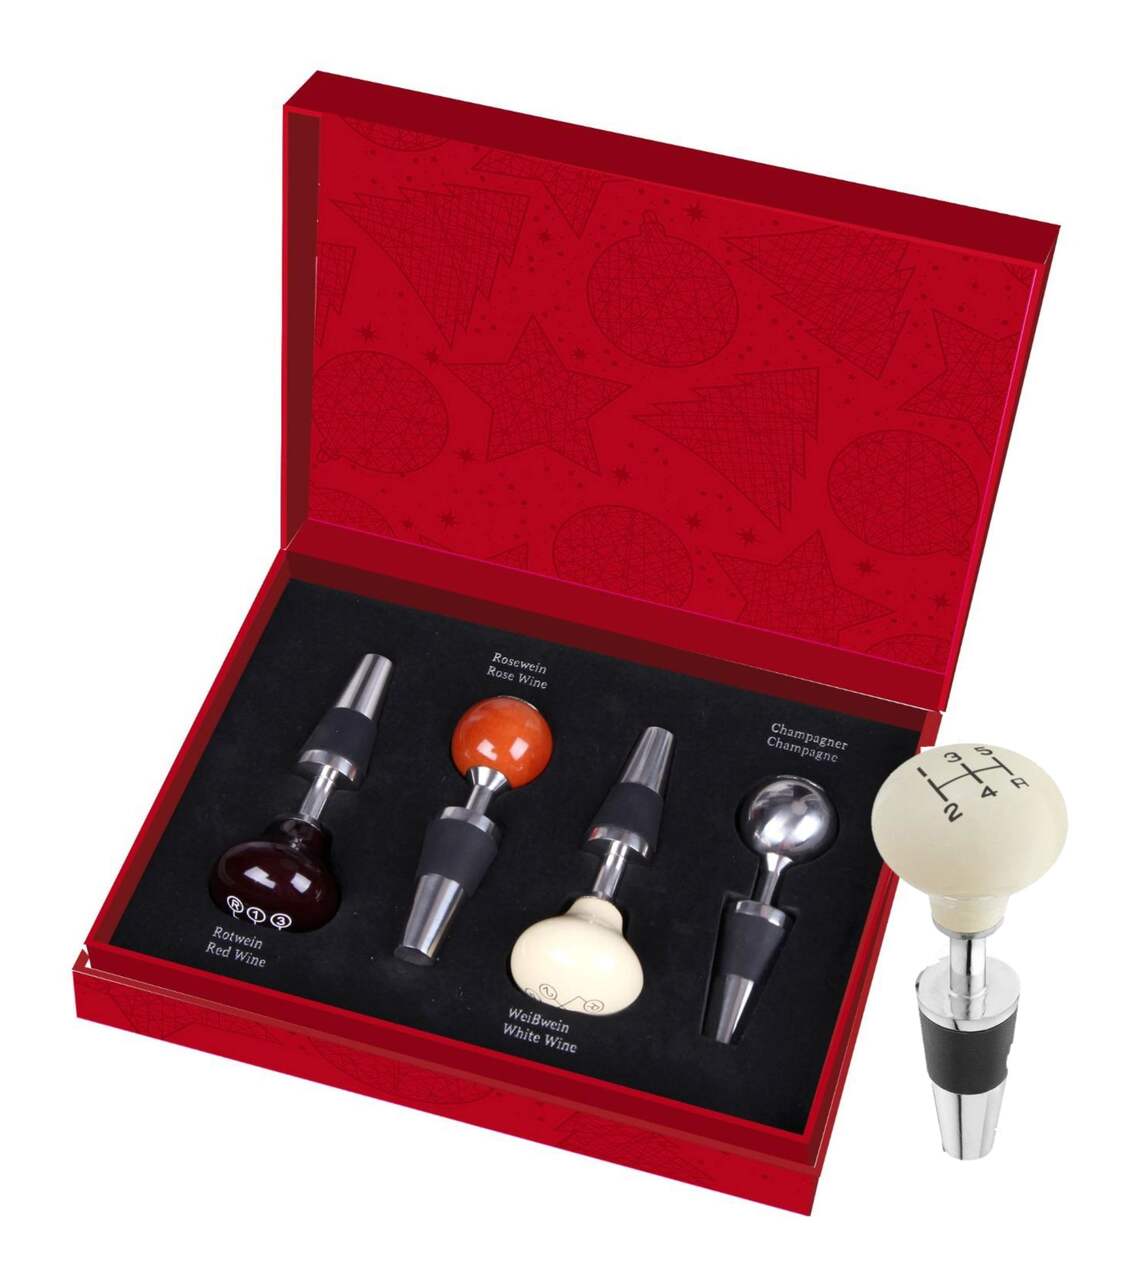 https://media-www.canadiantire.ca/product/automotive/car-care-accessories/auto-accessories/3995437/gear-shift-wine-stopper-gift-pack-e8648483-a134-4028-bbd3-be19a2222389-jpgrendition.jpg?imdensity=1&imwidth=1244&impolicy=mZoom